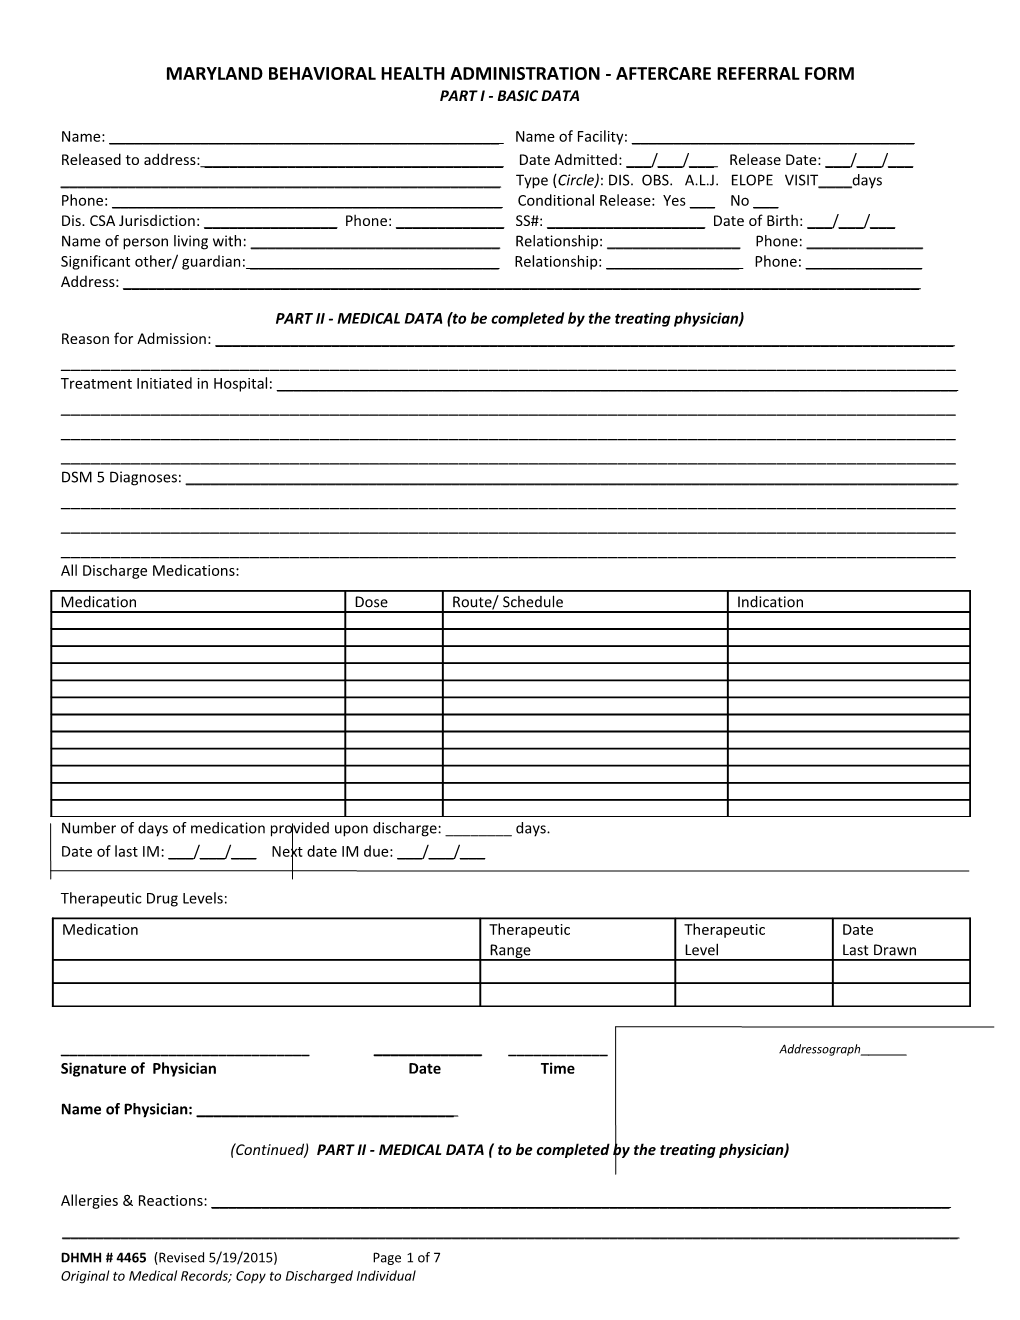 Maryland Behavioral Health Administration - Aftercare Referral Form